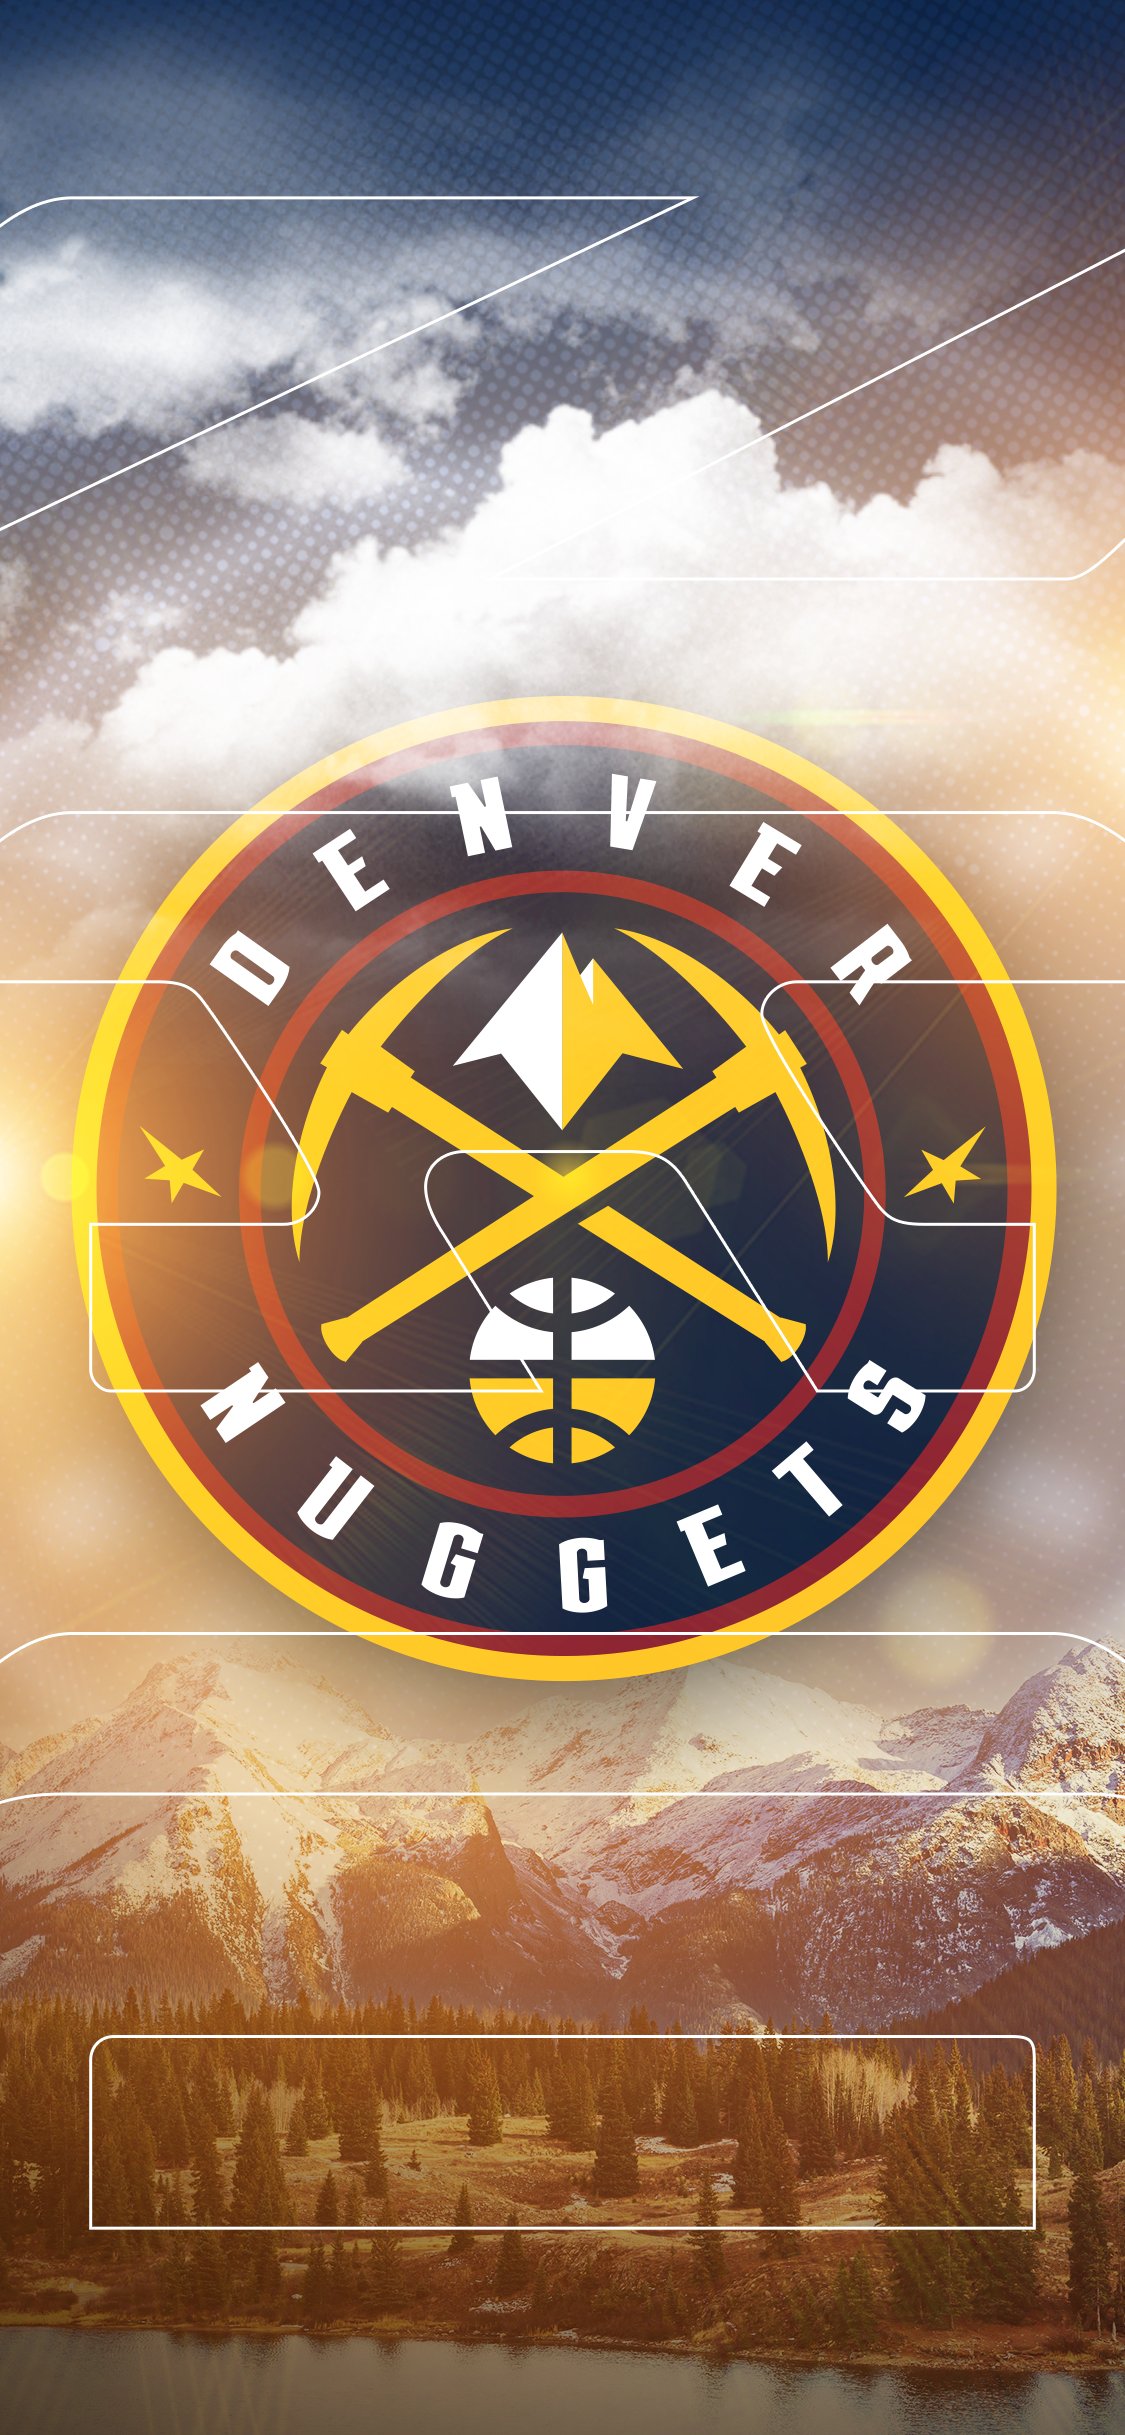 Denver nuggets on its wallpaper wednesday aka our favorite day of the week so heres our gift to you fresh wallpapers ð milehighbasketball httpstcobuzwnvoaaz